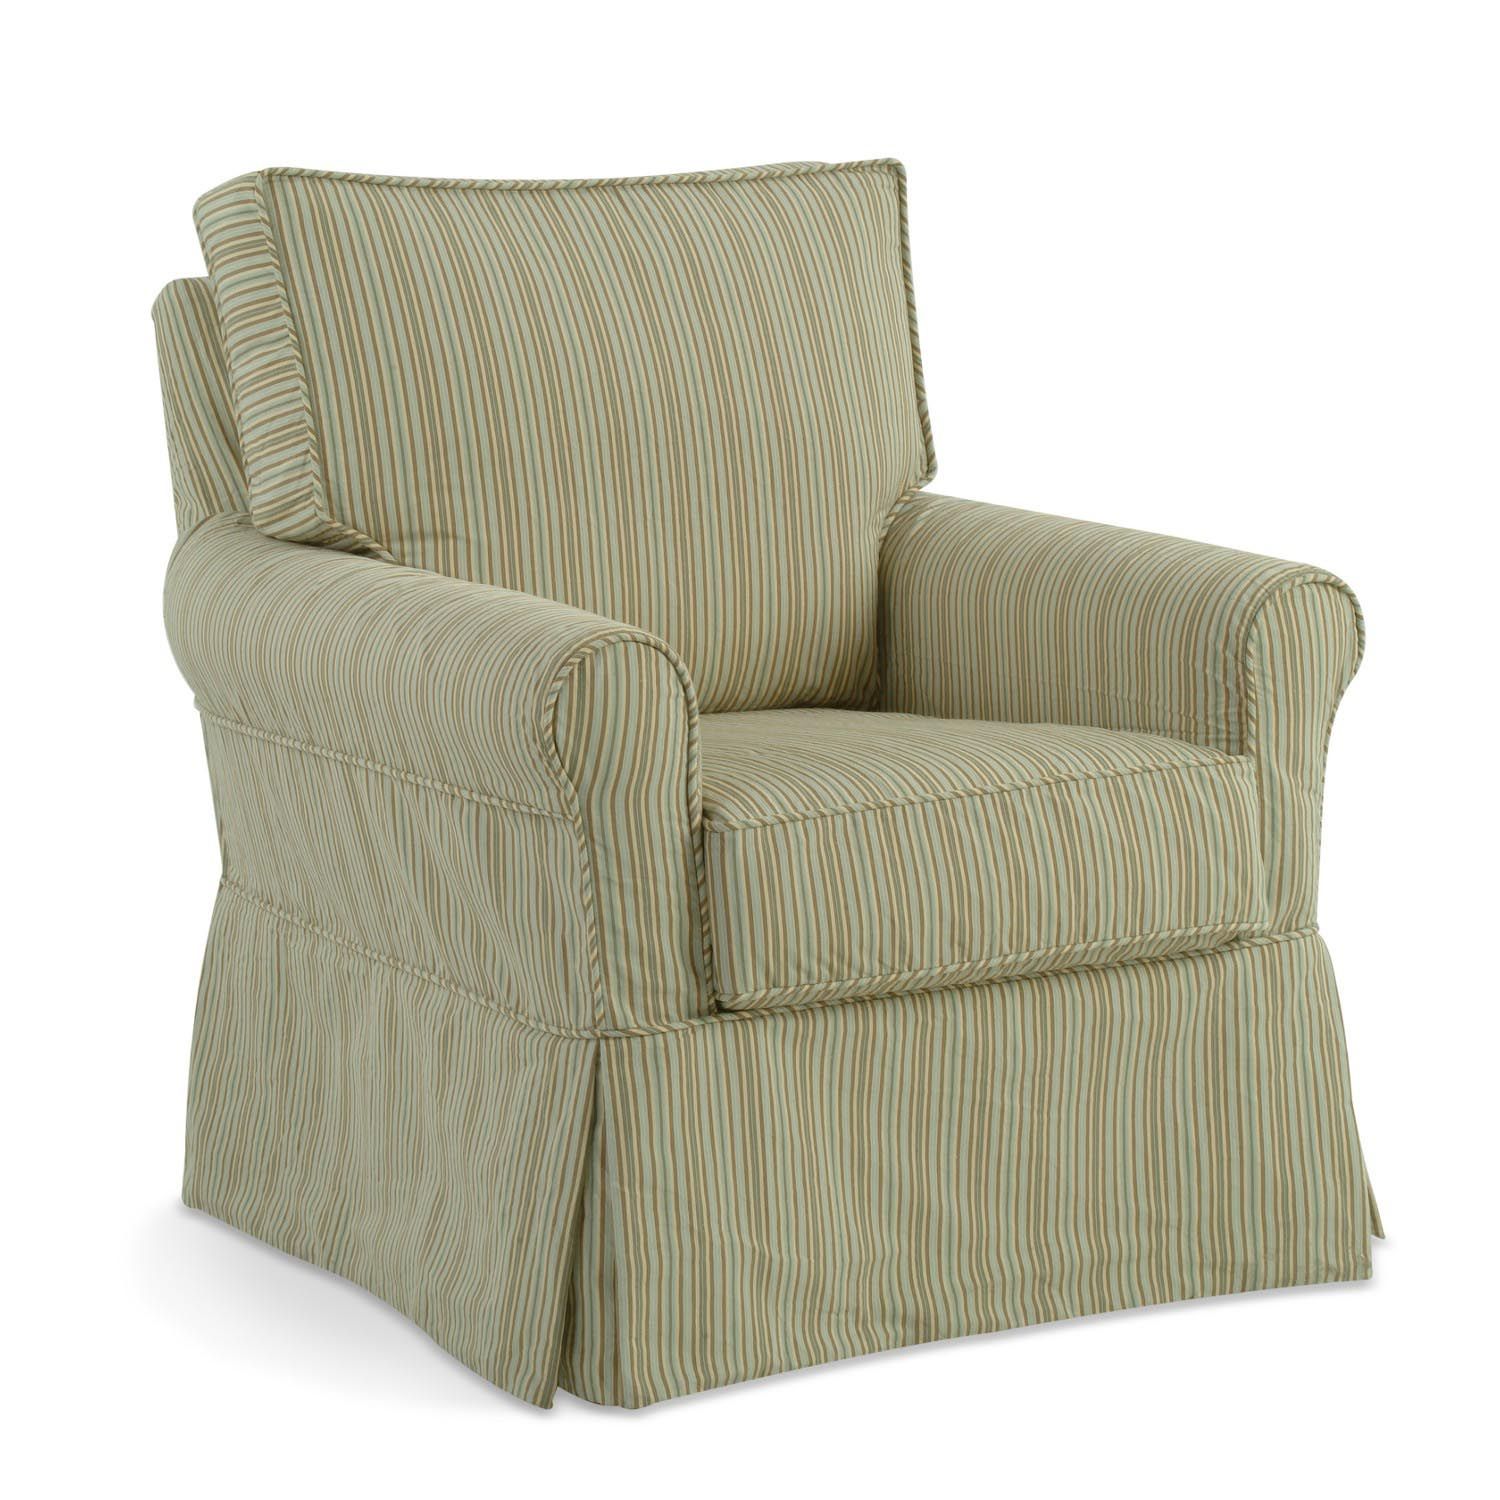 Libby Accent Chair | American Country With Regard To Loft Smokey Swivel Accent Chairs (View 2 of 25)